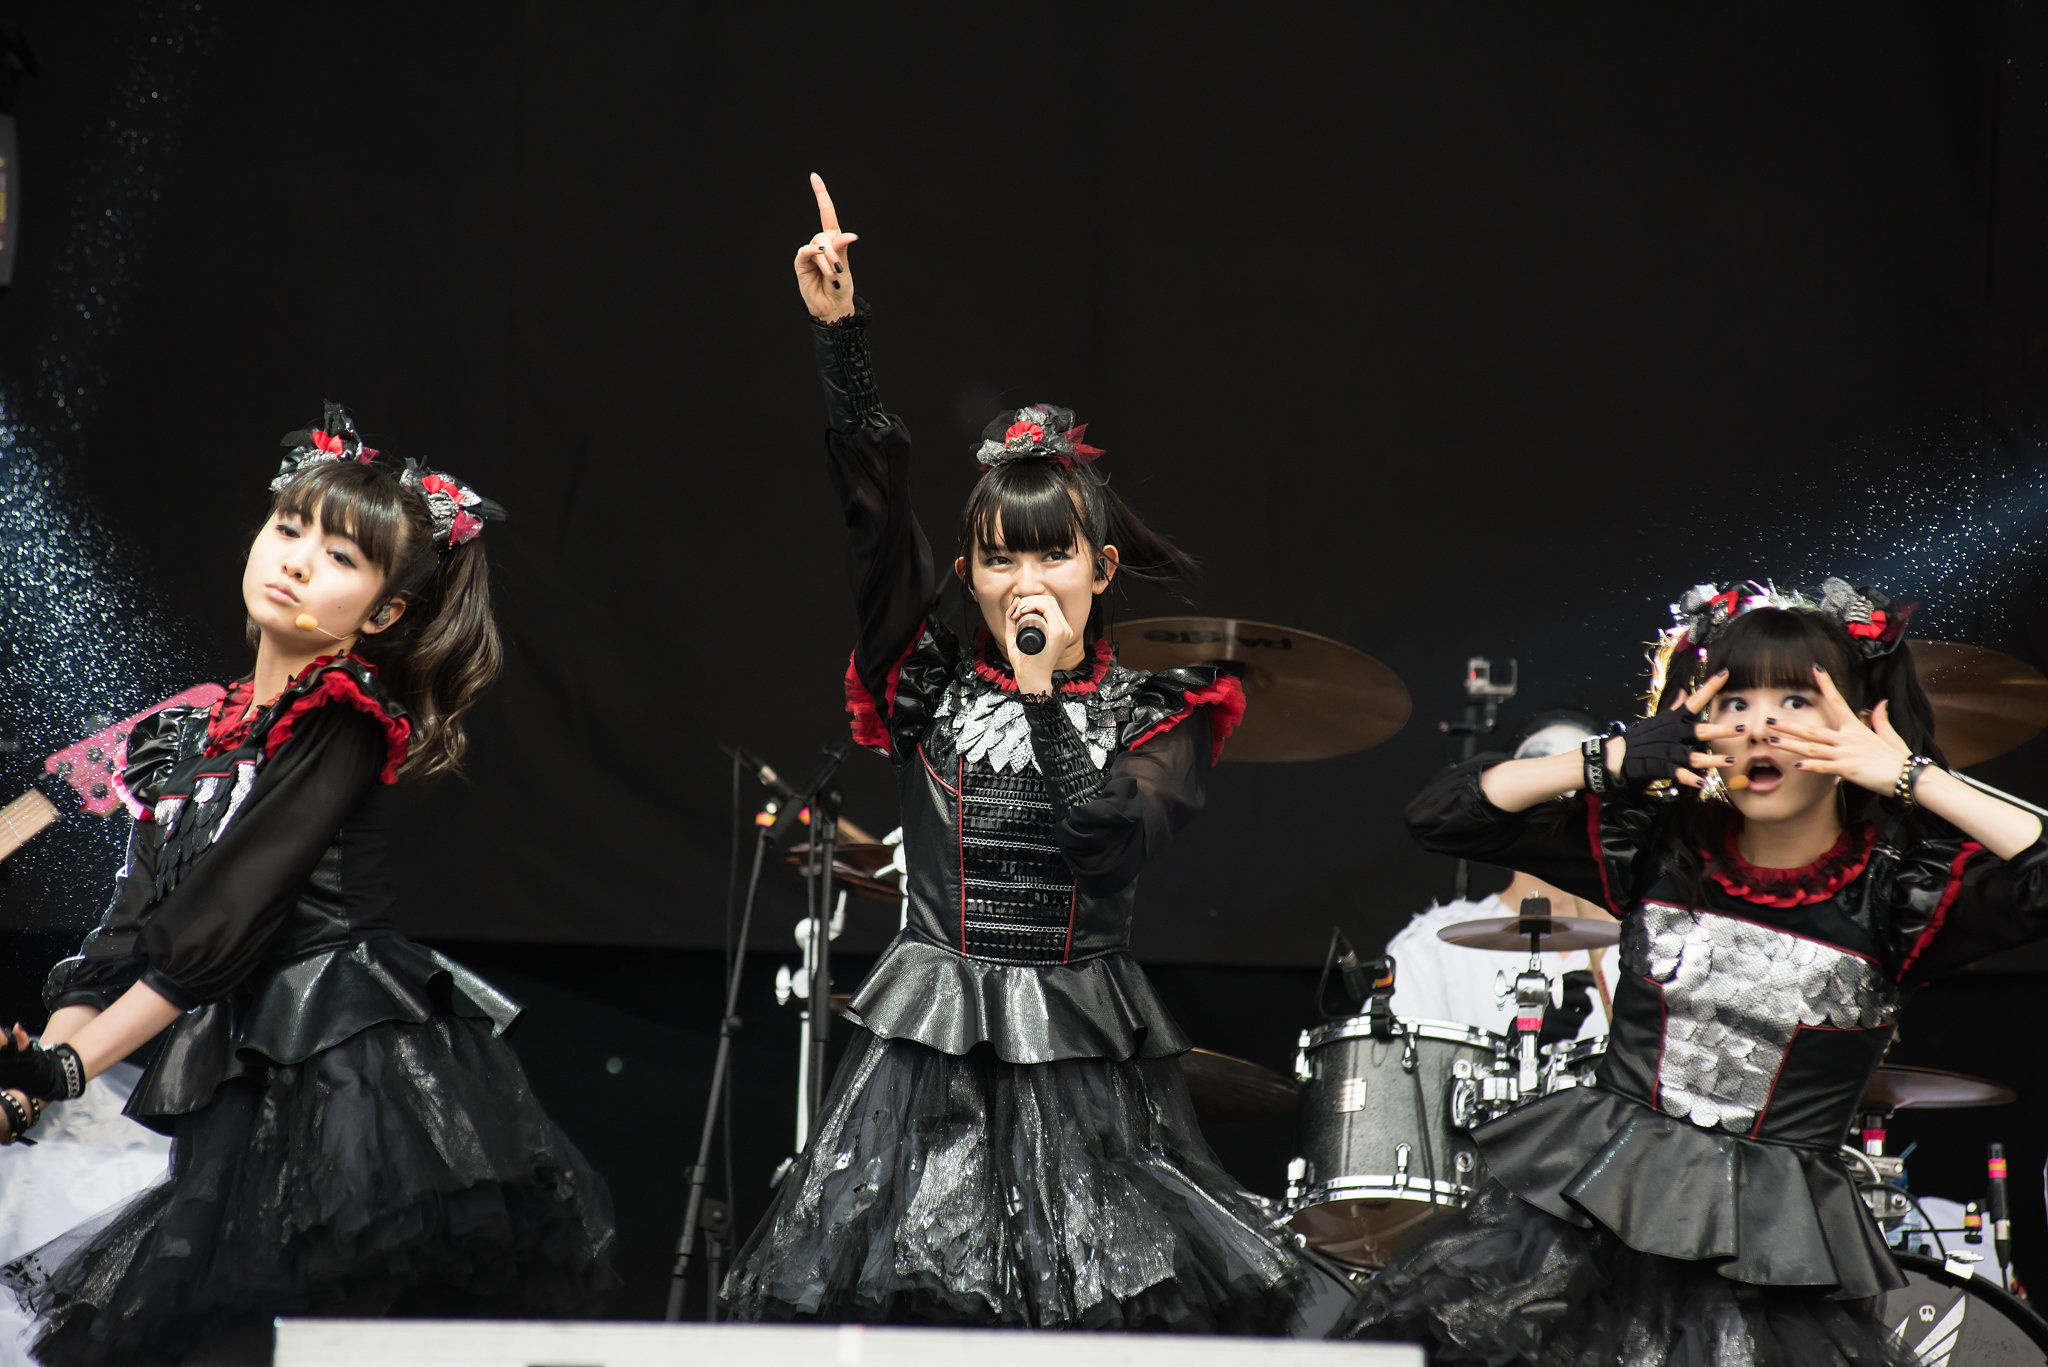 Download Festival | 10 Reasons Why We Love Babymetal - Download Festival2048 x 1367